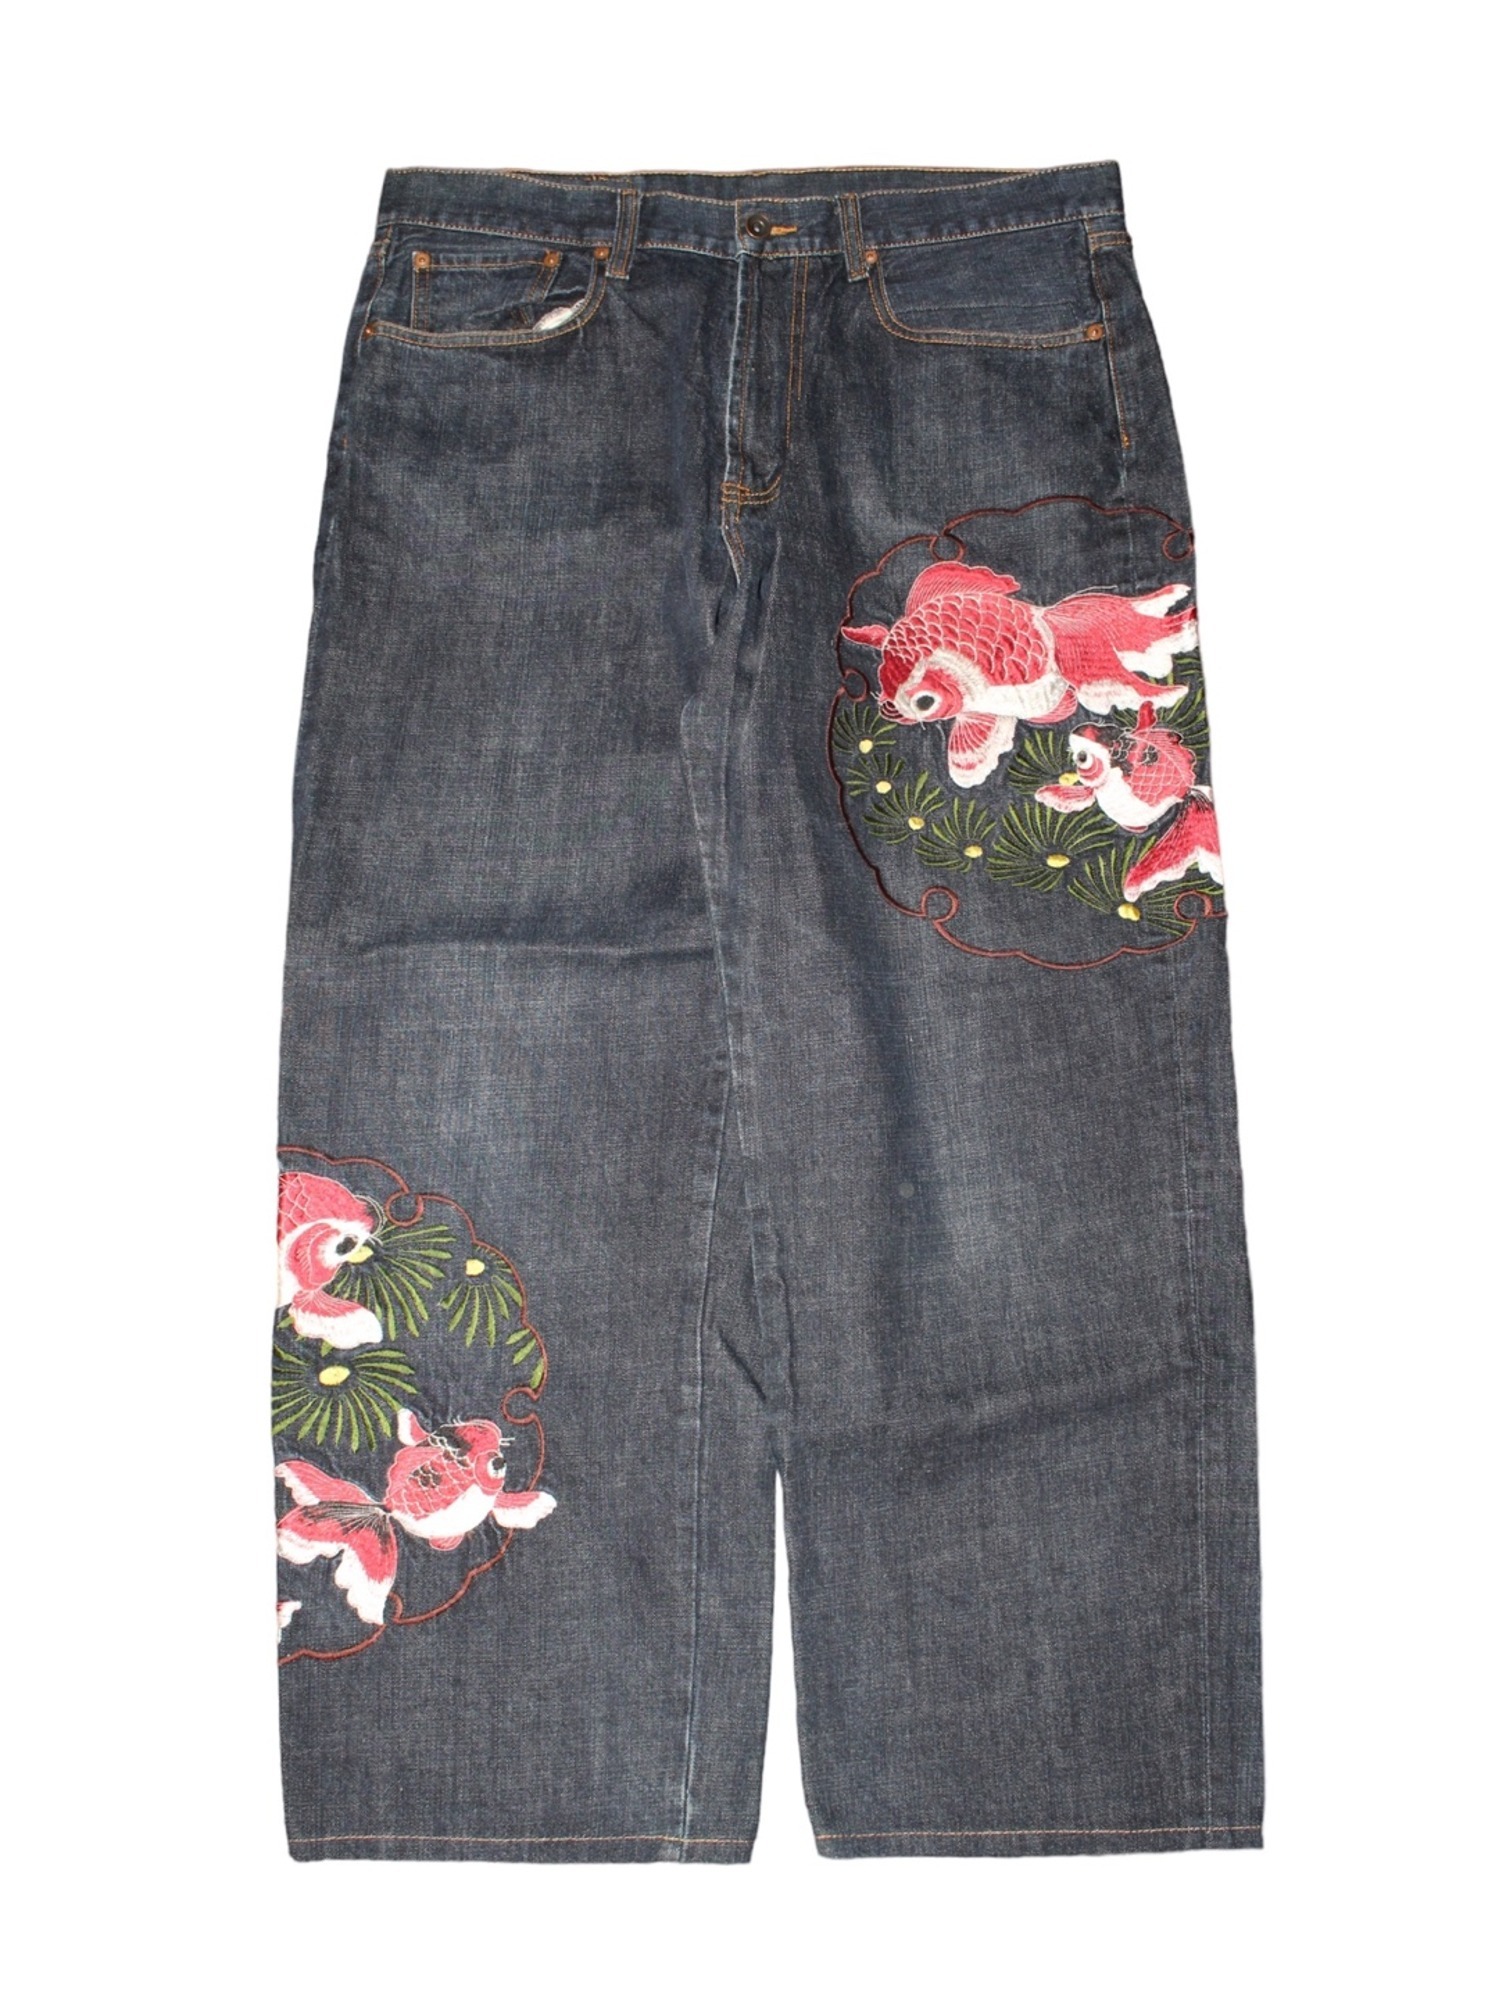 Script 花旅楽団 Red Fish Embroidery Denim Pants